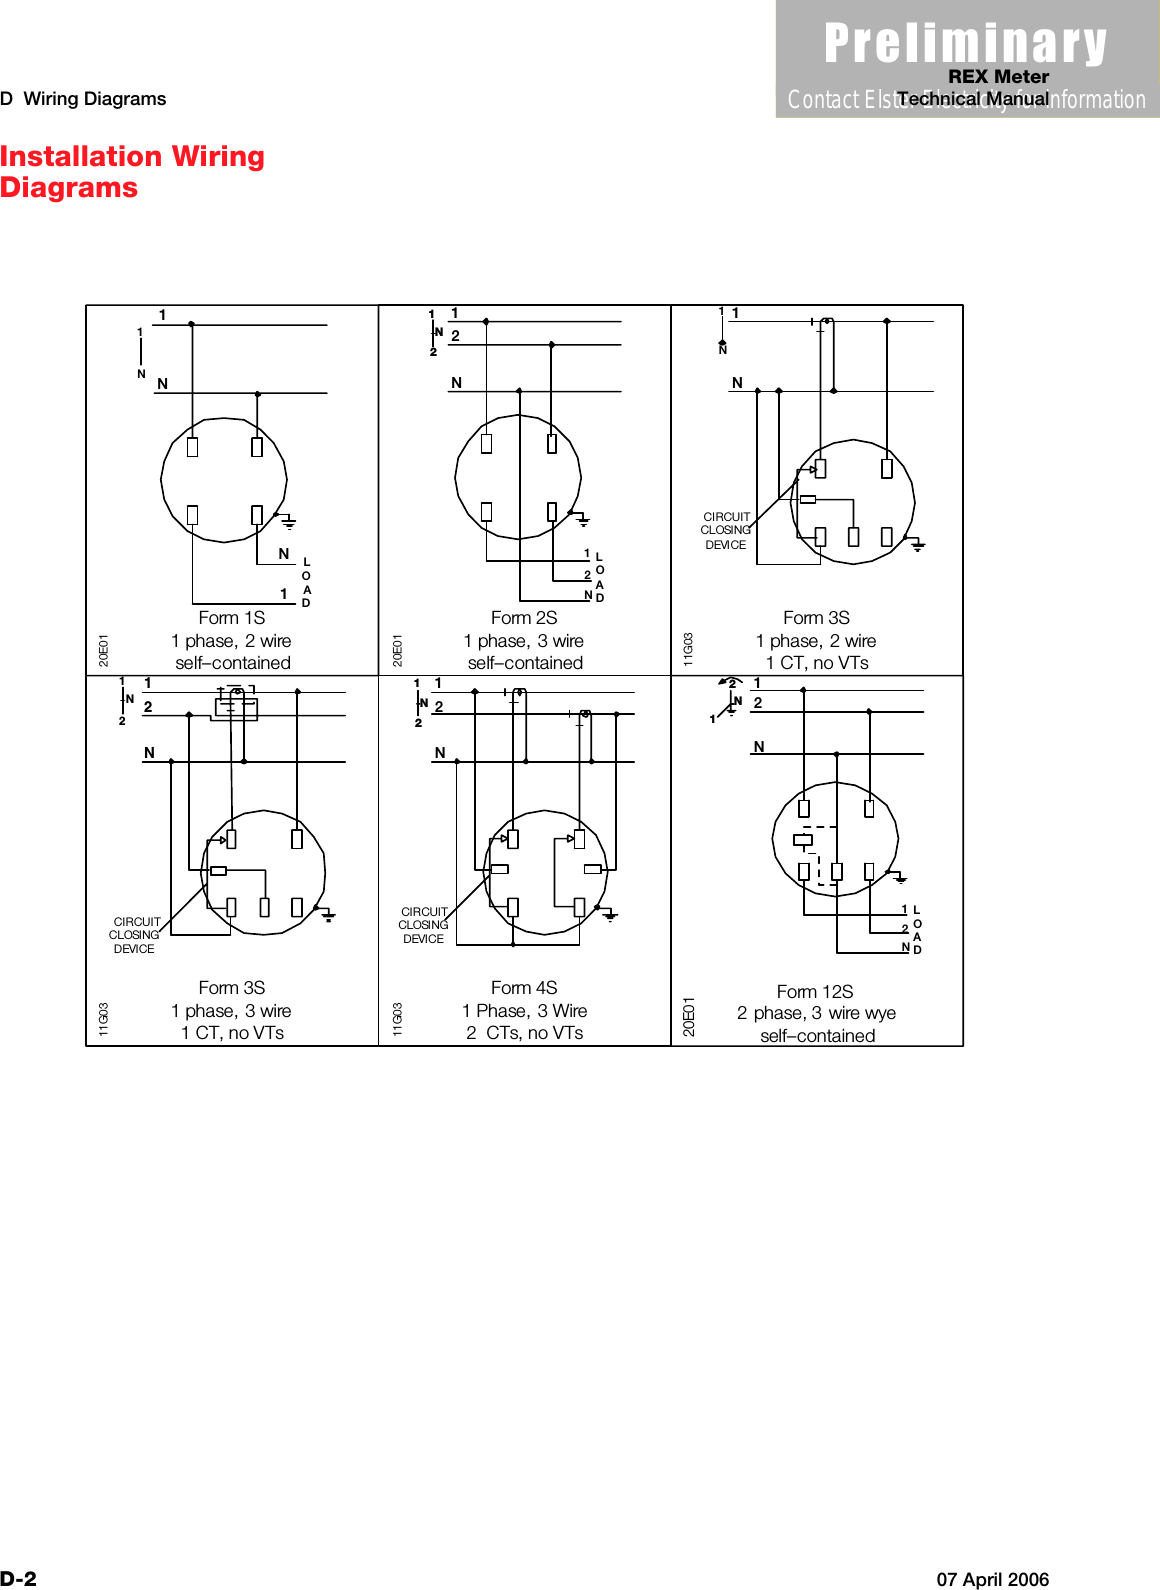 3UHOLPLQDU\Contact Elster Electricity for informationREX MeterD  Wiring Diagrams Technical ManualD-2 07 April 2006Installation Wiring DiagramsForm 3S1 phase, 3 wire1 CT, no VTs11G0312NN21CIRCUITCLOSINGDEVICEForm 4S1 Phase, 3 Wire2  CTs, no VTs11G0312NN21CIRCUITCLOSINGDEVICEN1LOAD1N1NForm 1S1 phase, 2 wireself–contained20E0112NLOAD2N1N21Form 2S1 phase, 3 wireself–contained20E01Form 3S1 phase, 2 wire1 CT, no VTs11G031NN1CIRCUITCLOSINGDEVICELOAD2N112NN21Form 12S2 phase, 3 wire wyeself–contained20E01